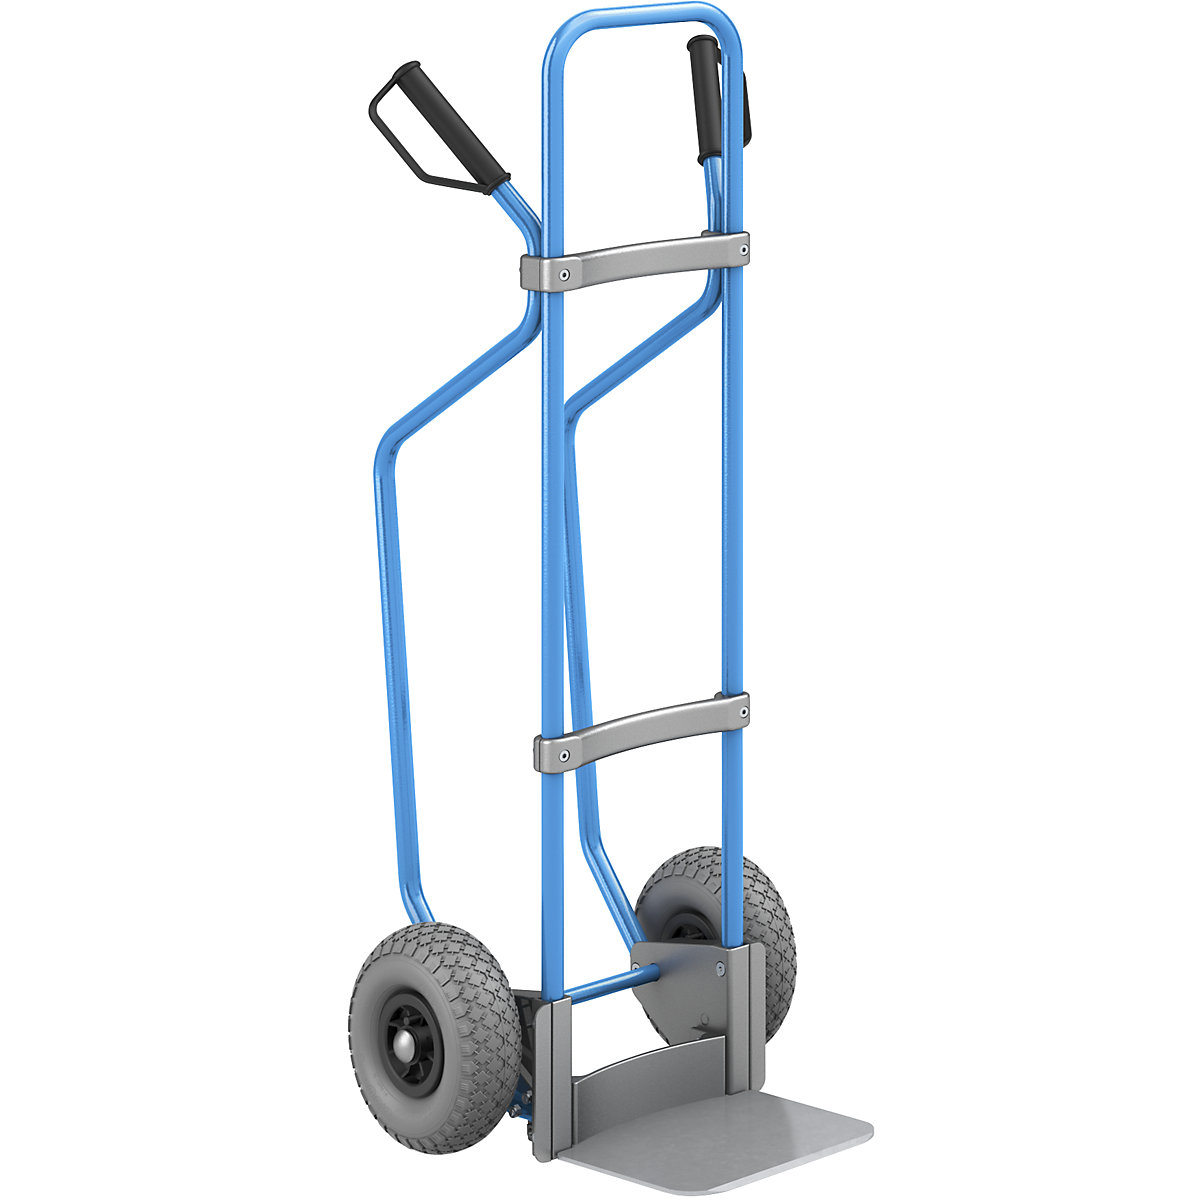 Sack truck with runners, blue – eurokraft pro, footplate WxD 280 x 250 mm, zinc plated, PU tyres-3